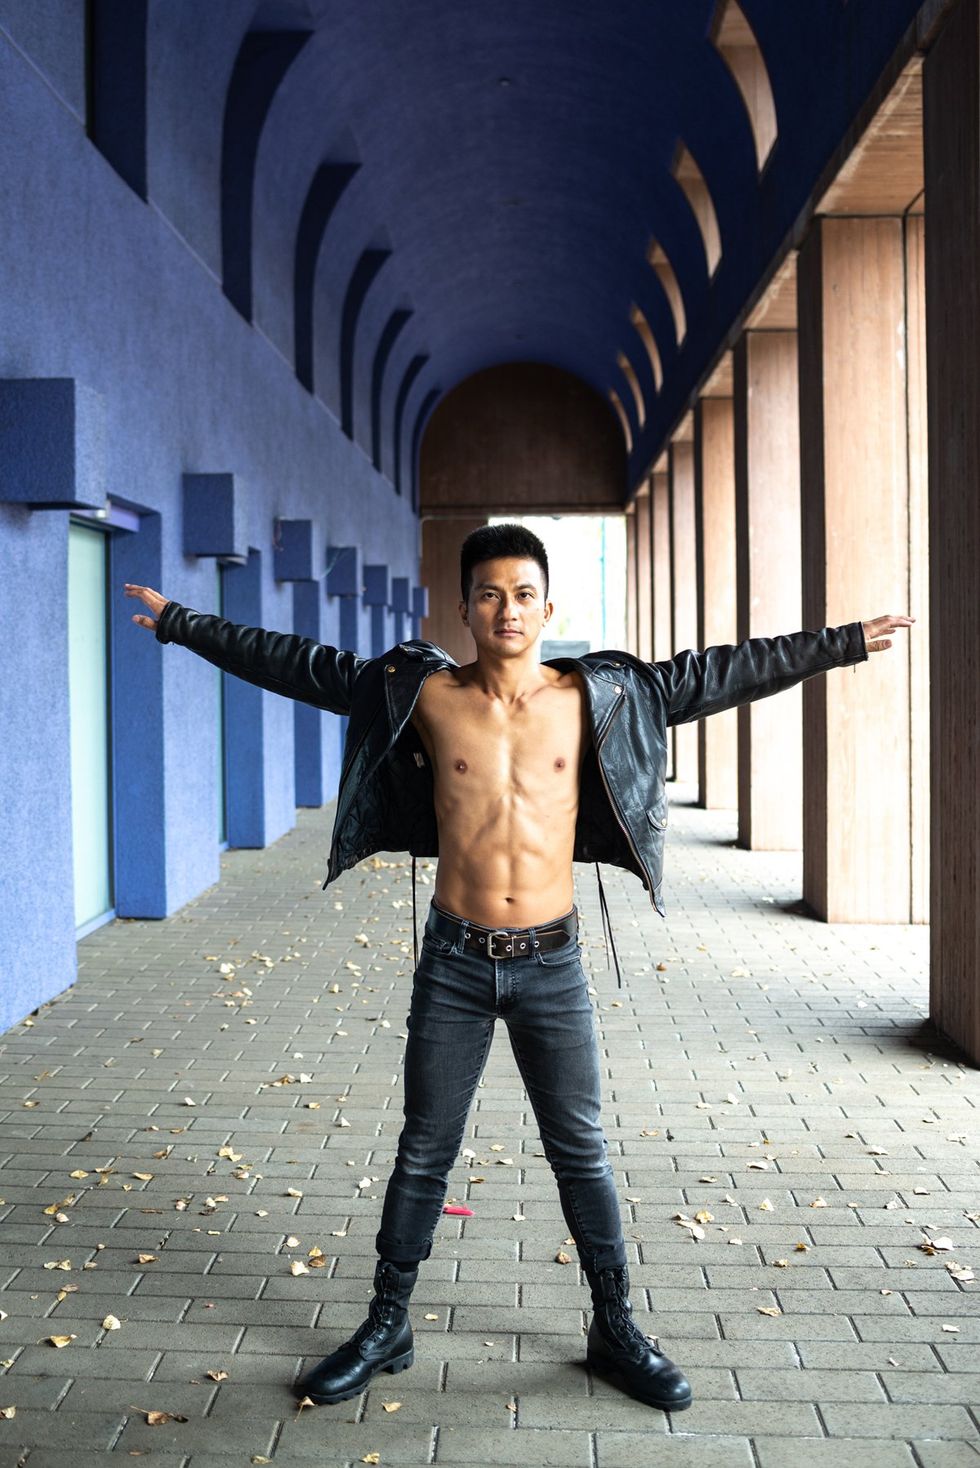 Asian American man wears jeans and a leather jacket over bare chest, stands arms outstretched